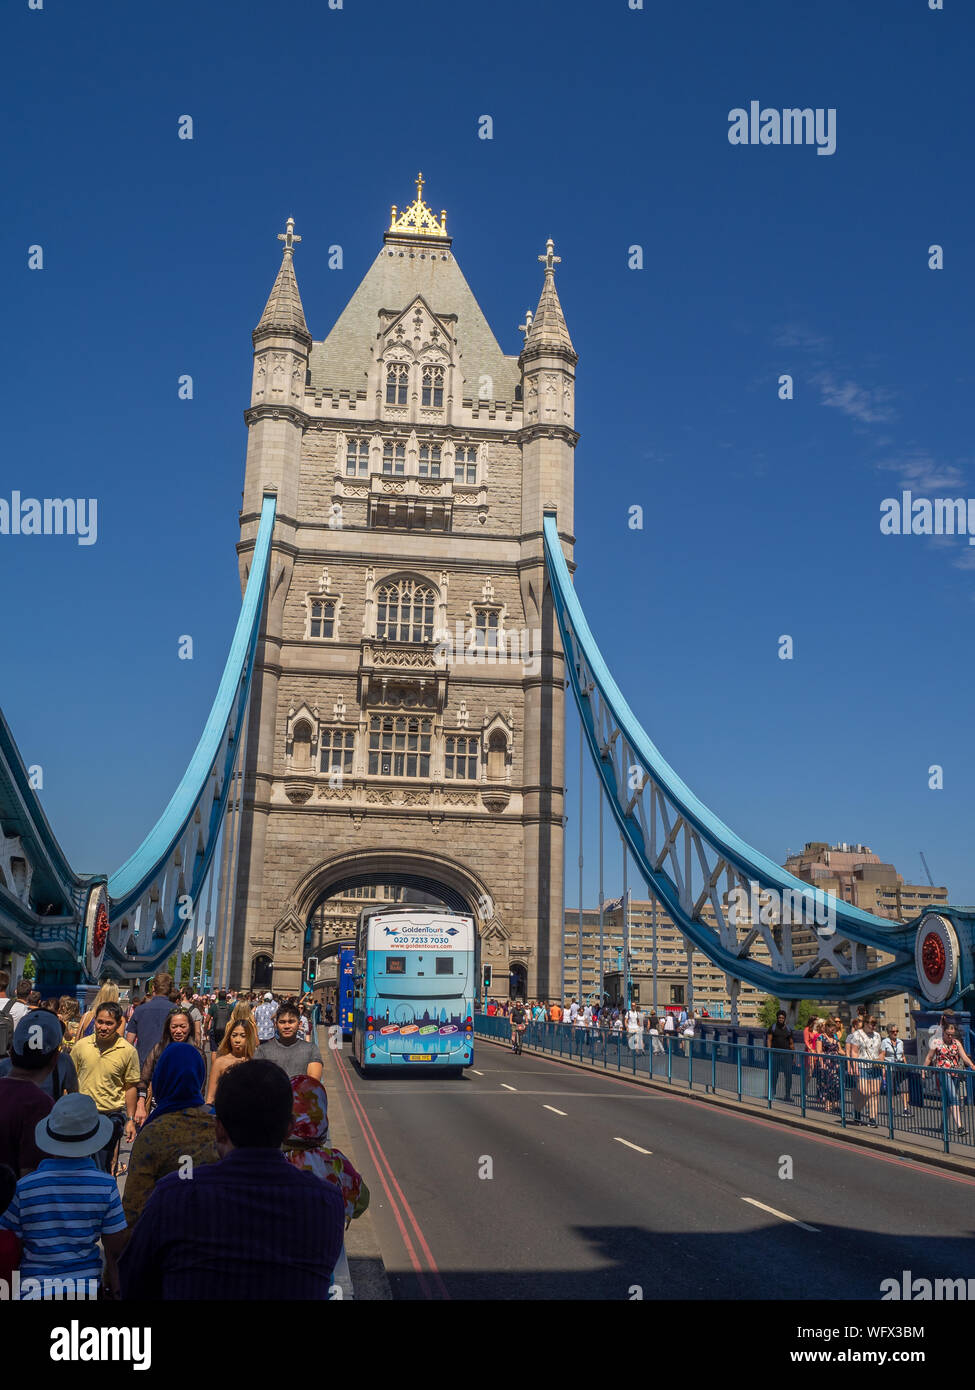 London, England - August 5, 2018: London's famous Tower Bridge on blue sky summer day. Tower Bridge is one of London's most famous tourist attractions Stock Photo